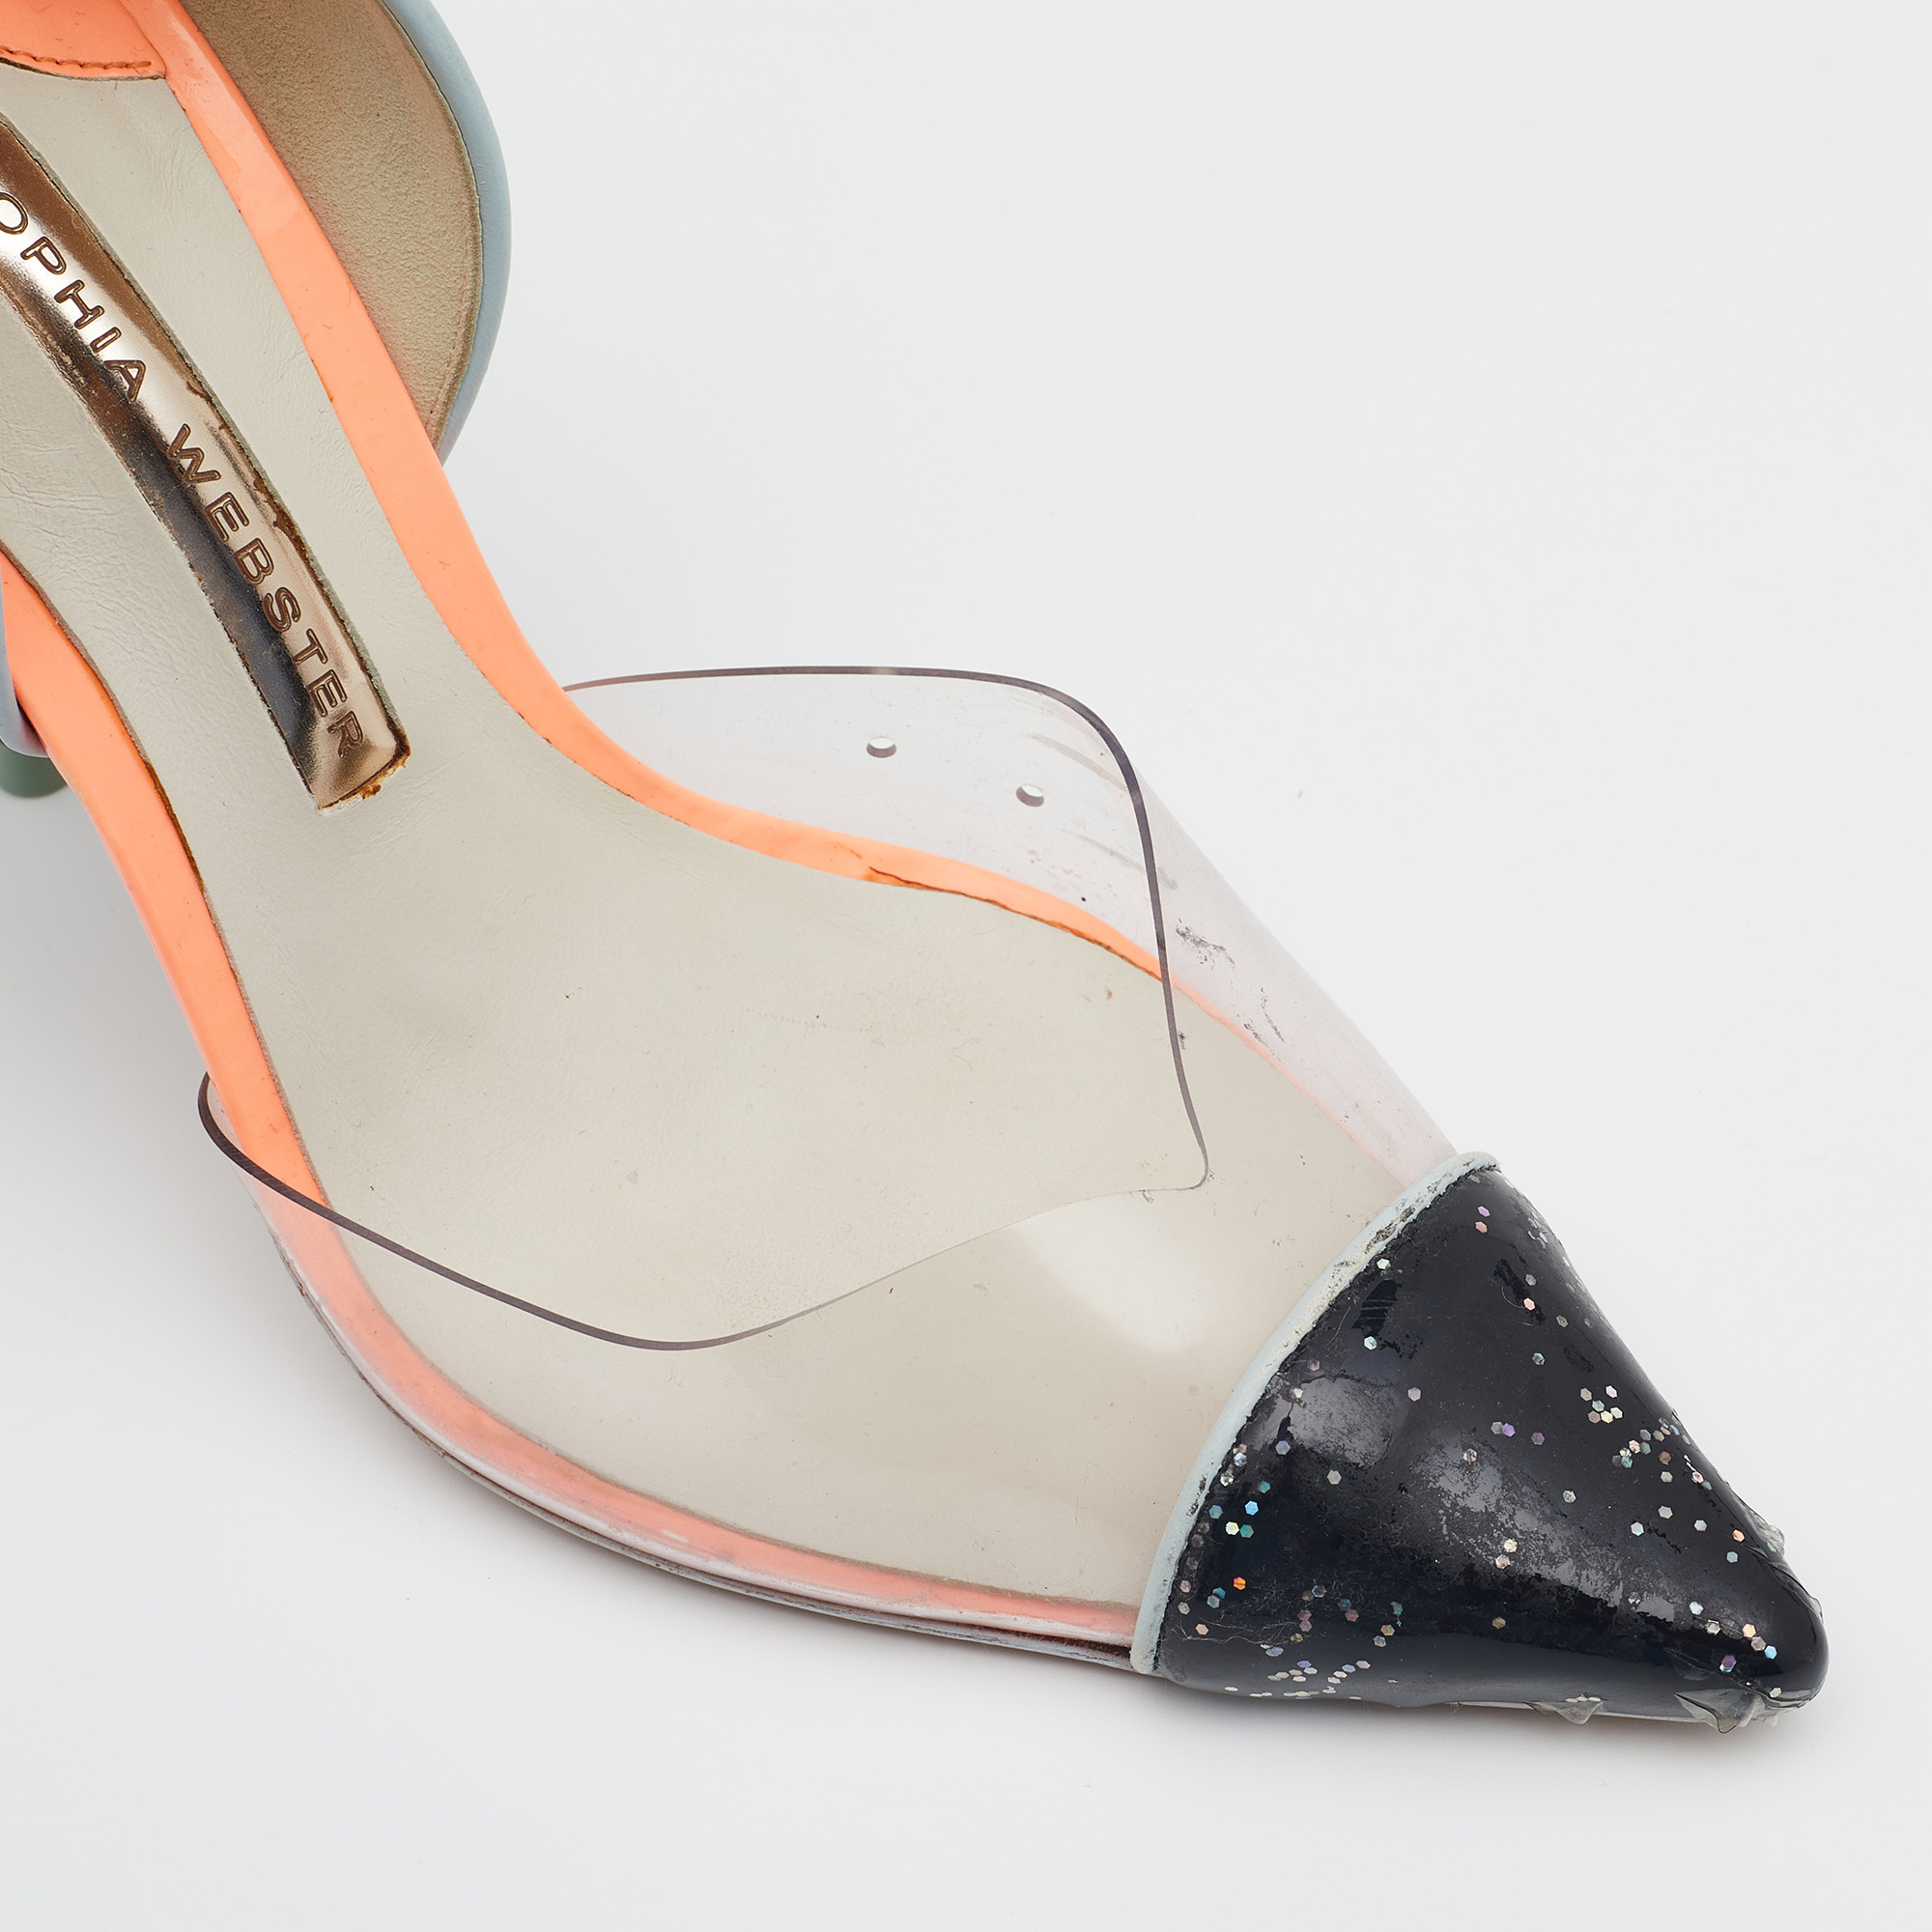 Sophia Webster Multicolor Patent Leather And PVC Jessica Pumps Size 36